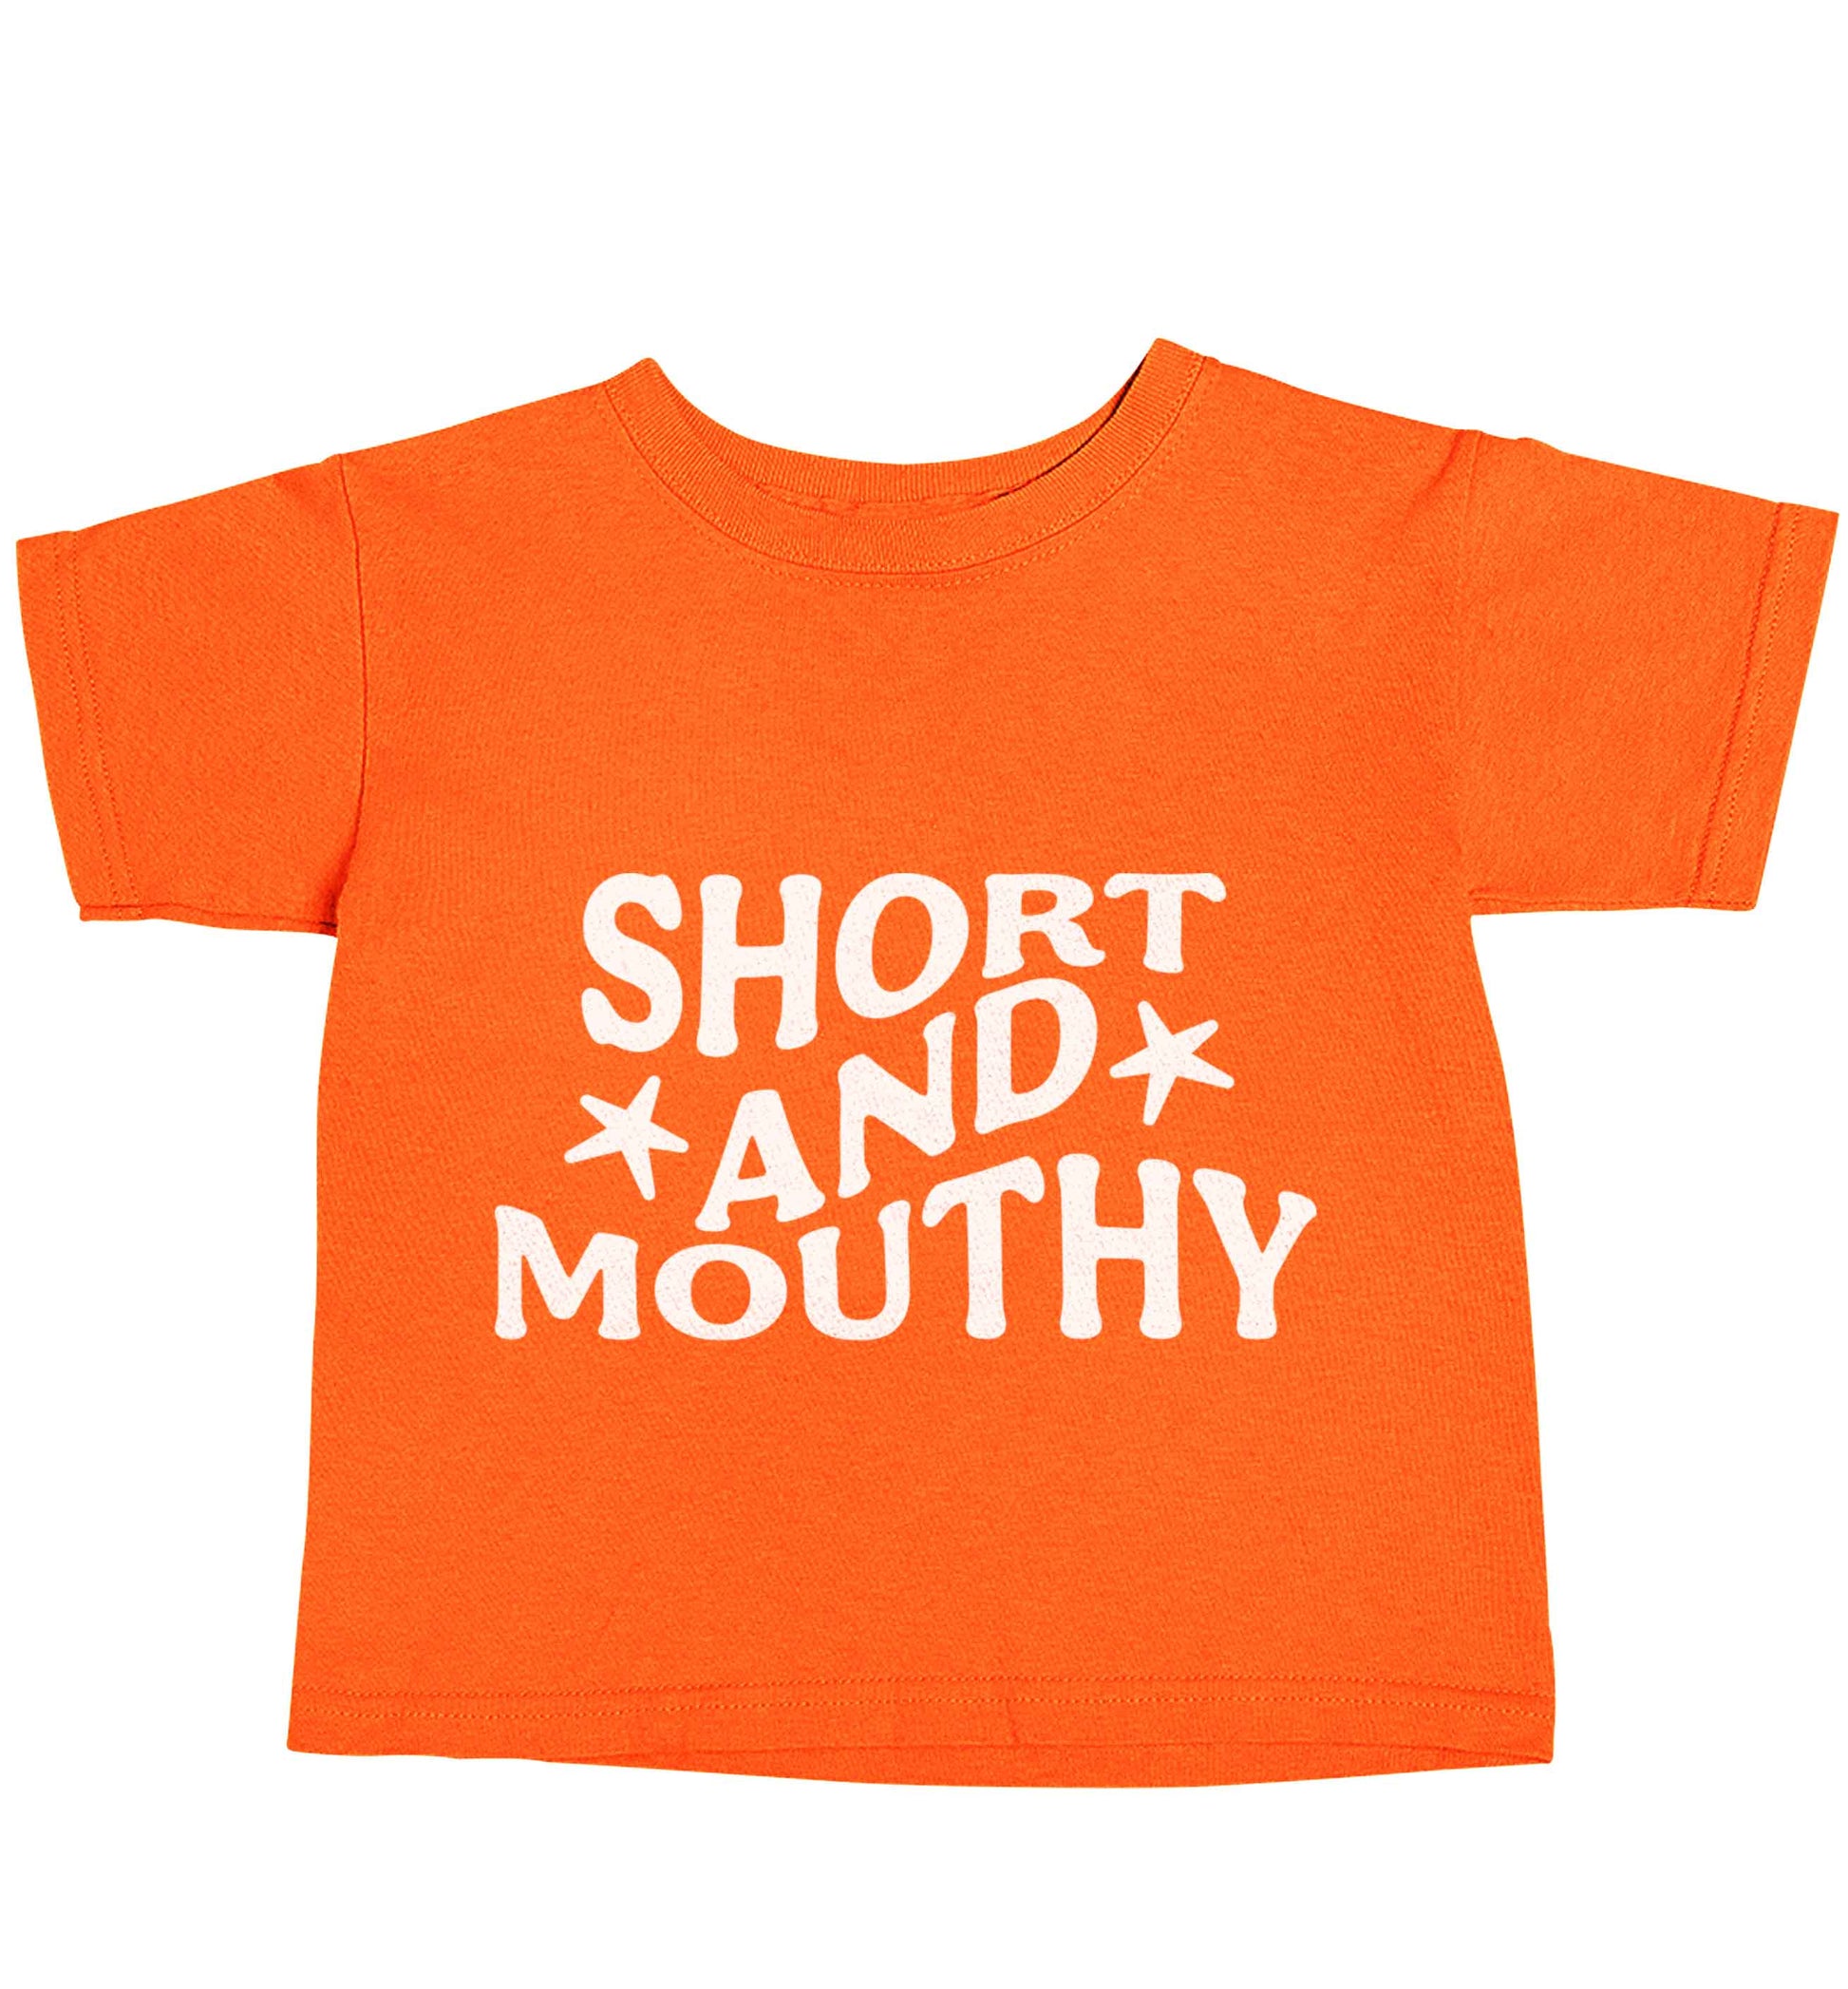 Short and mouthy orange baby toddler Tshirt 2 Years